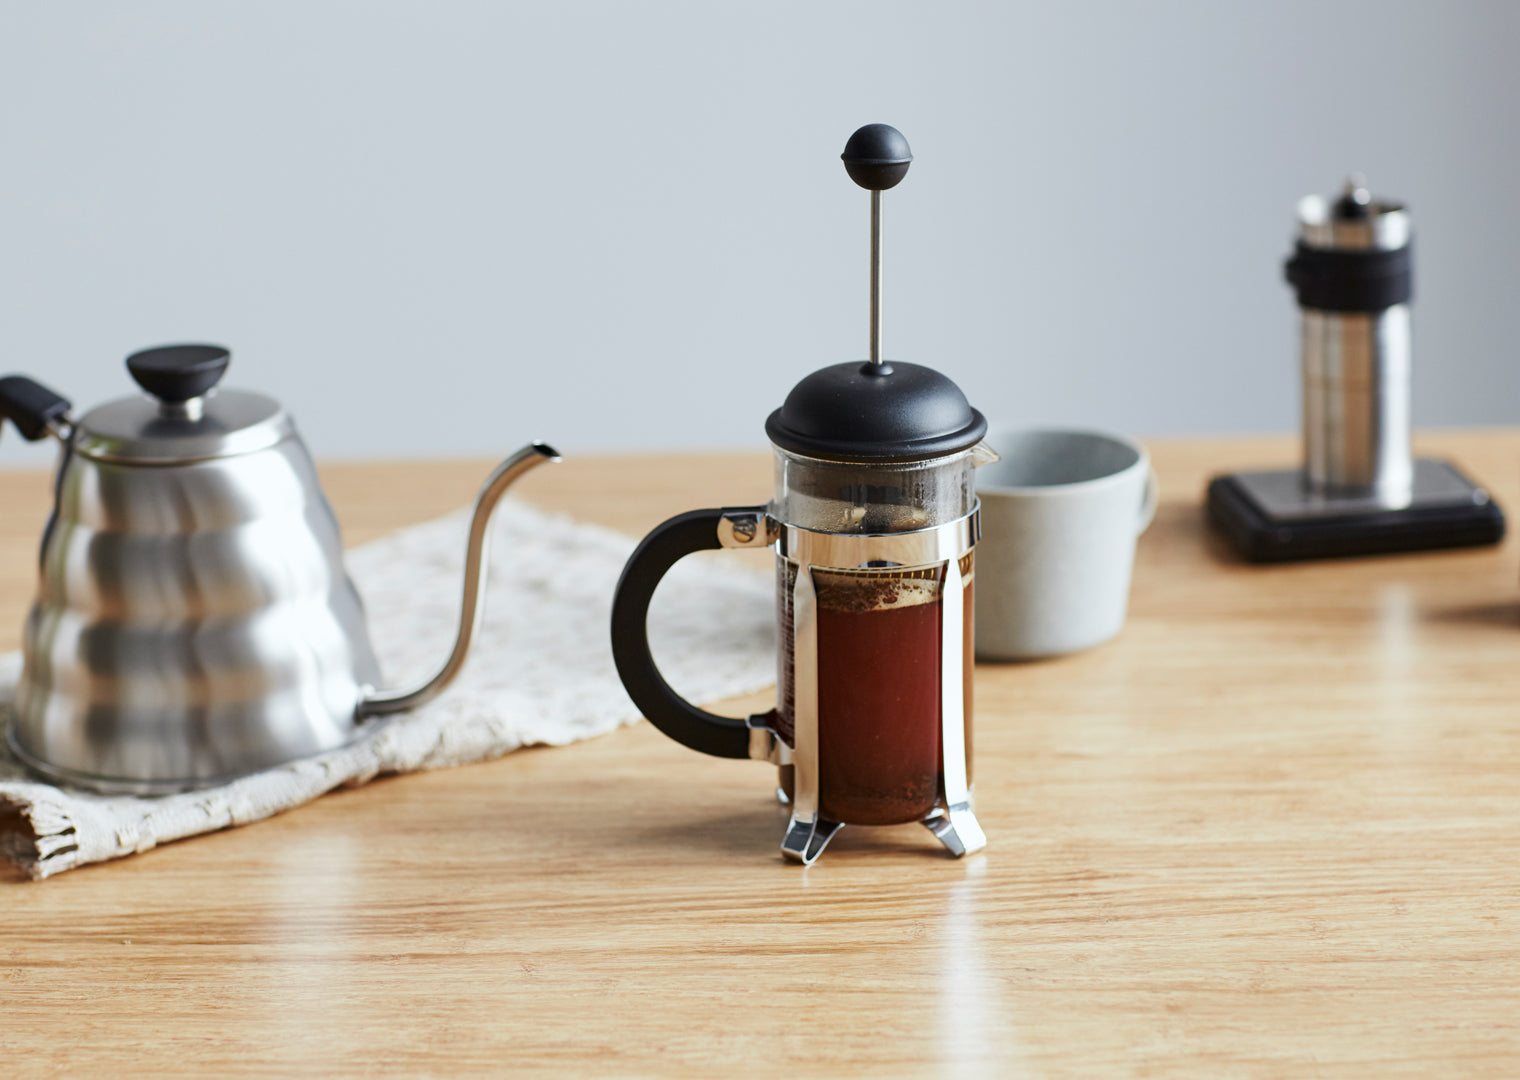 How to Make Plunger Coffee